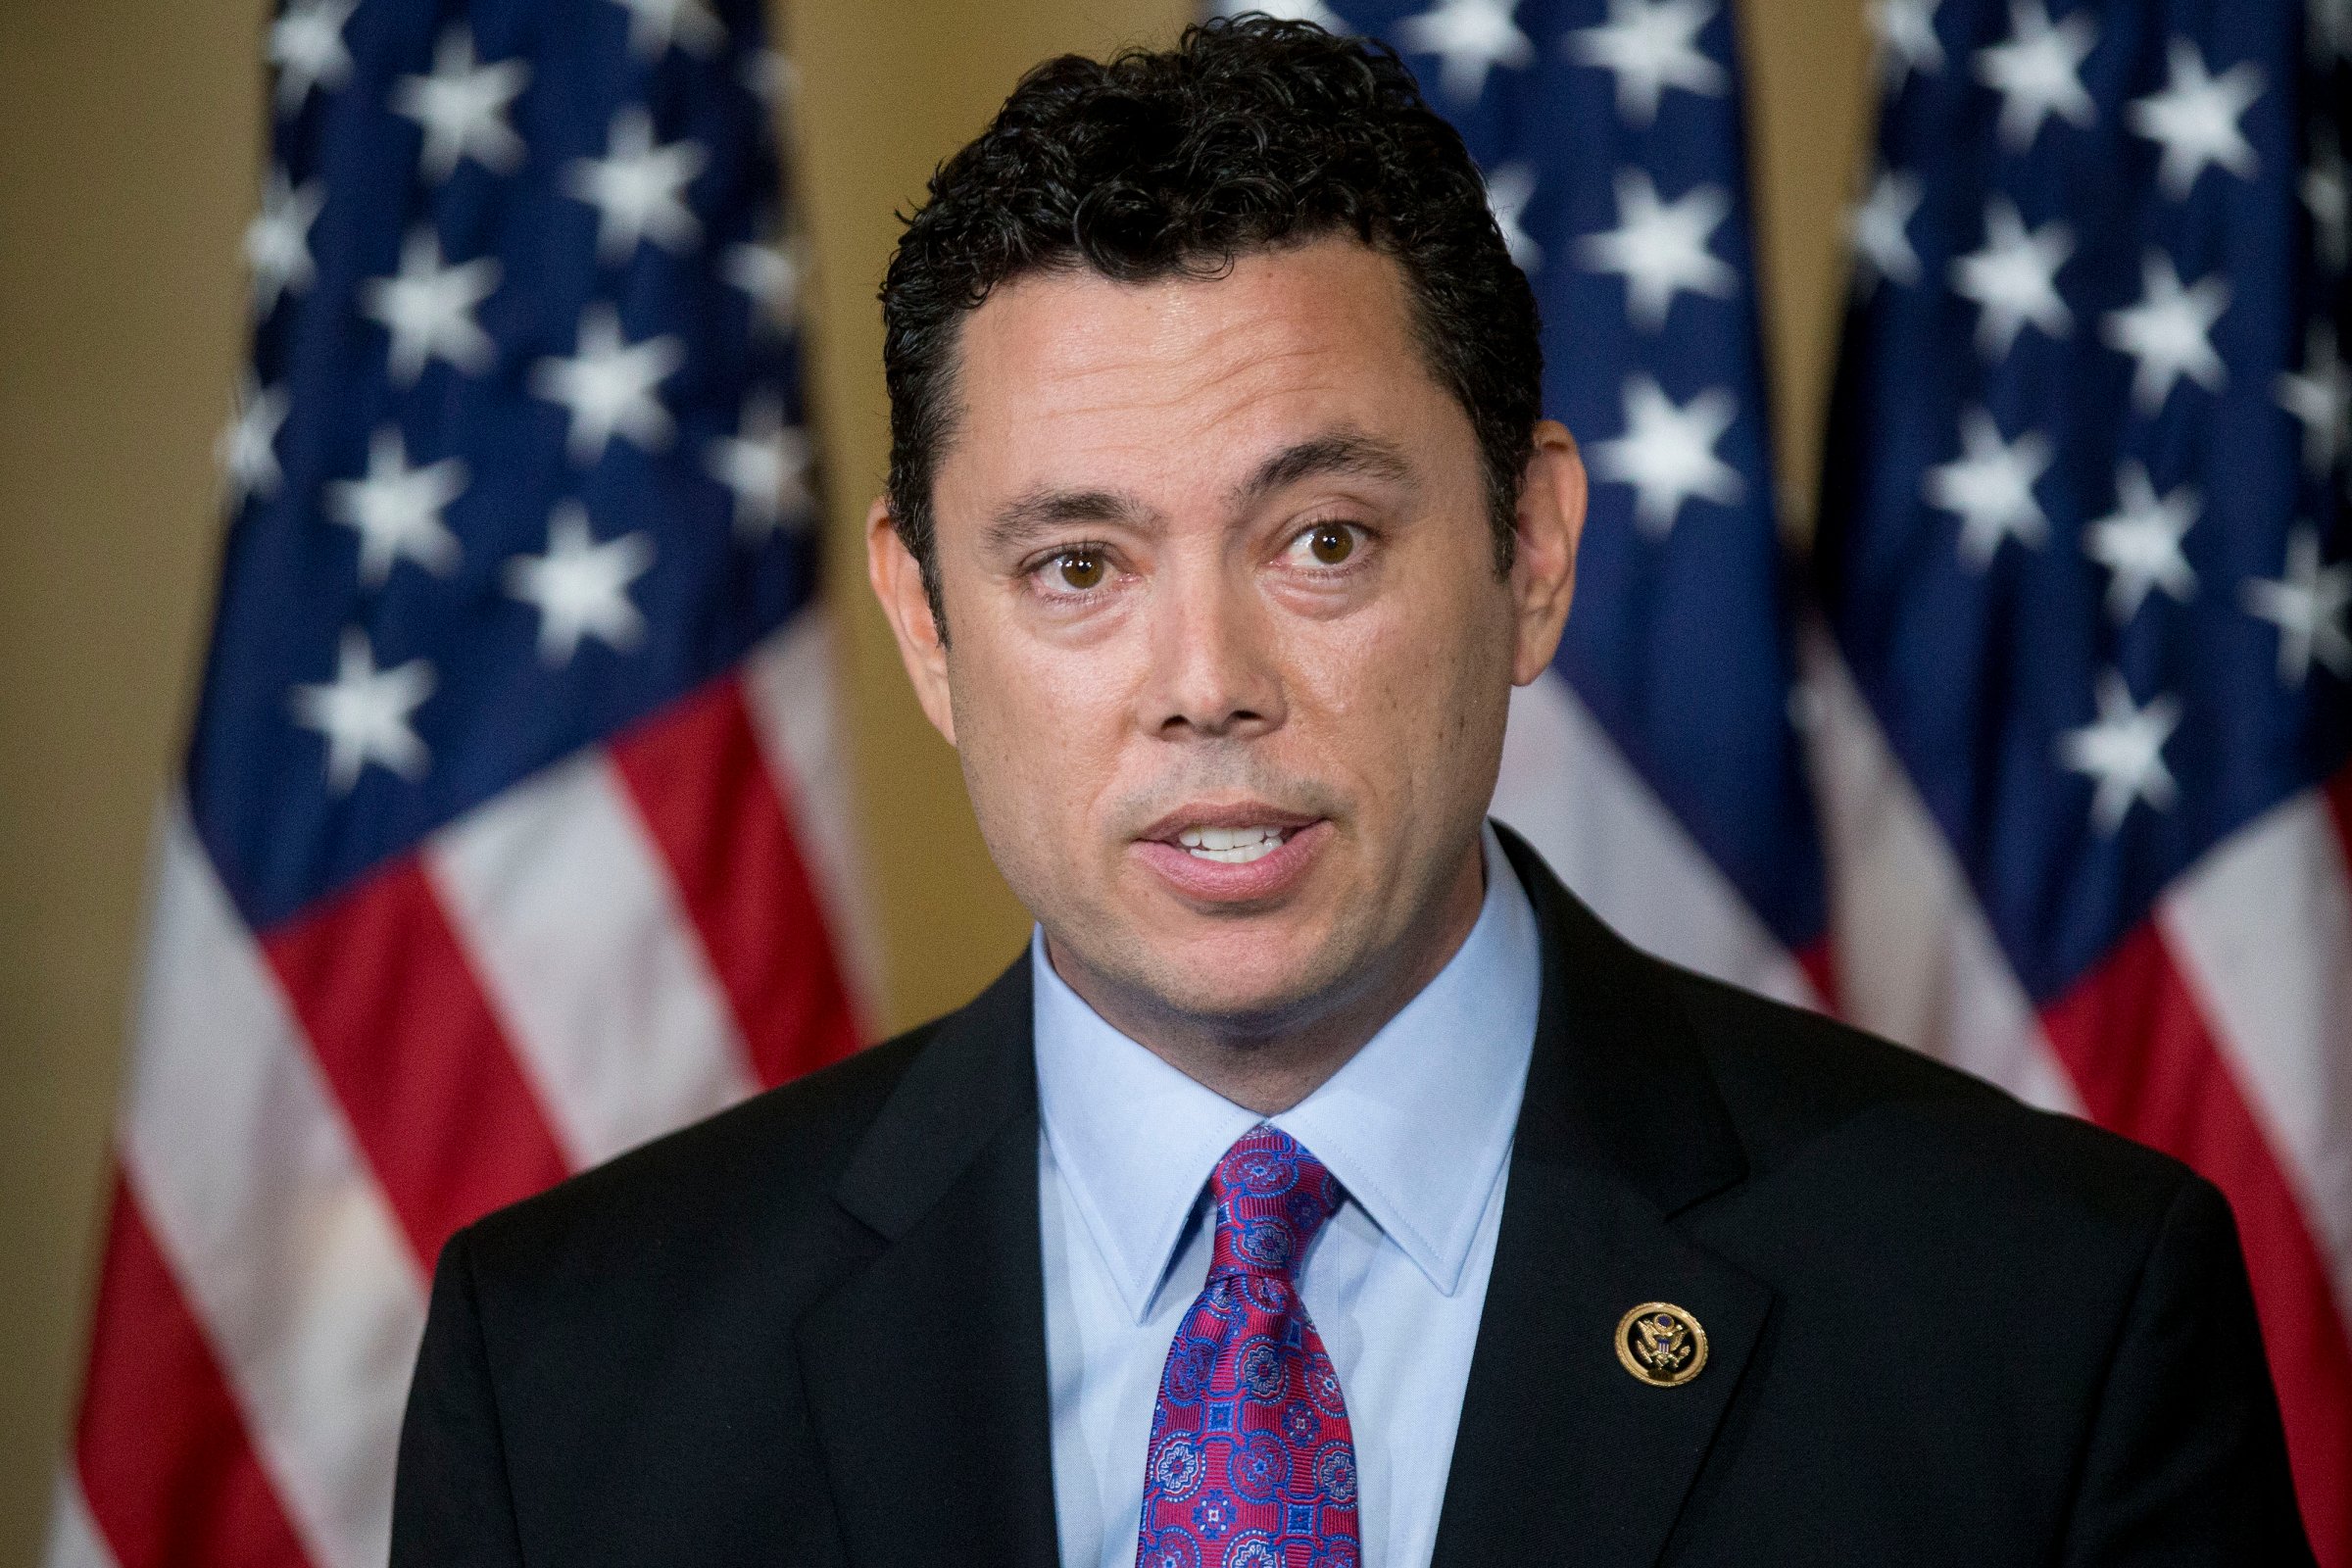 Representative Jason Chaffetz, a Republican from Utah, speaks to members of the media after a closed House Republican election meeting on Capitol Hill in Washington, D.C., U.S., on Thursday, Oct. 8, 2015.